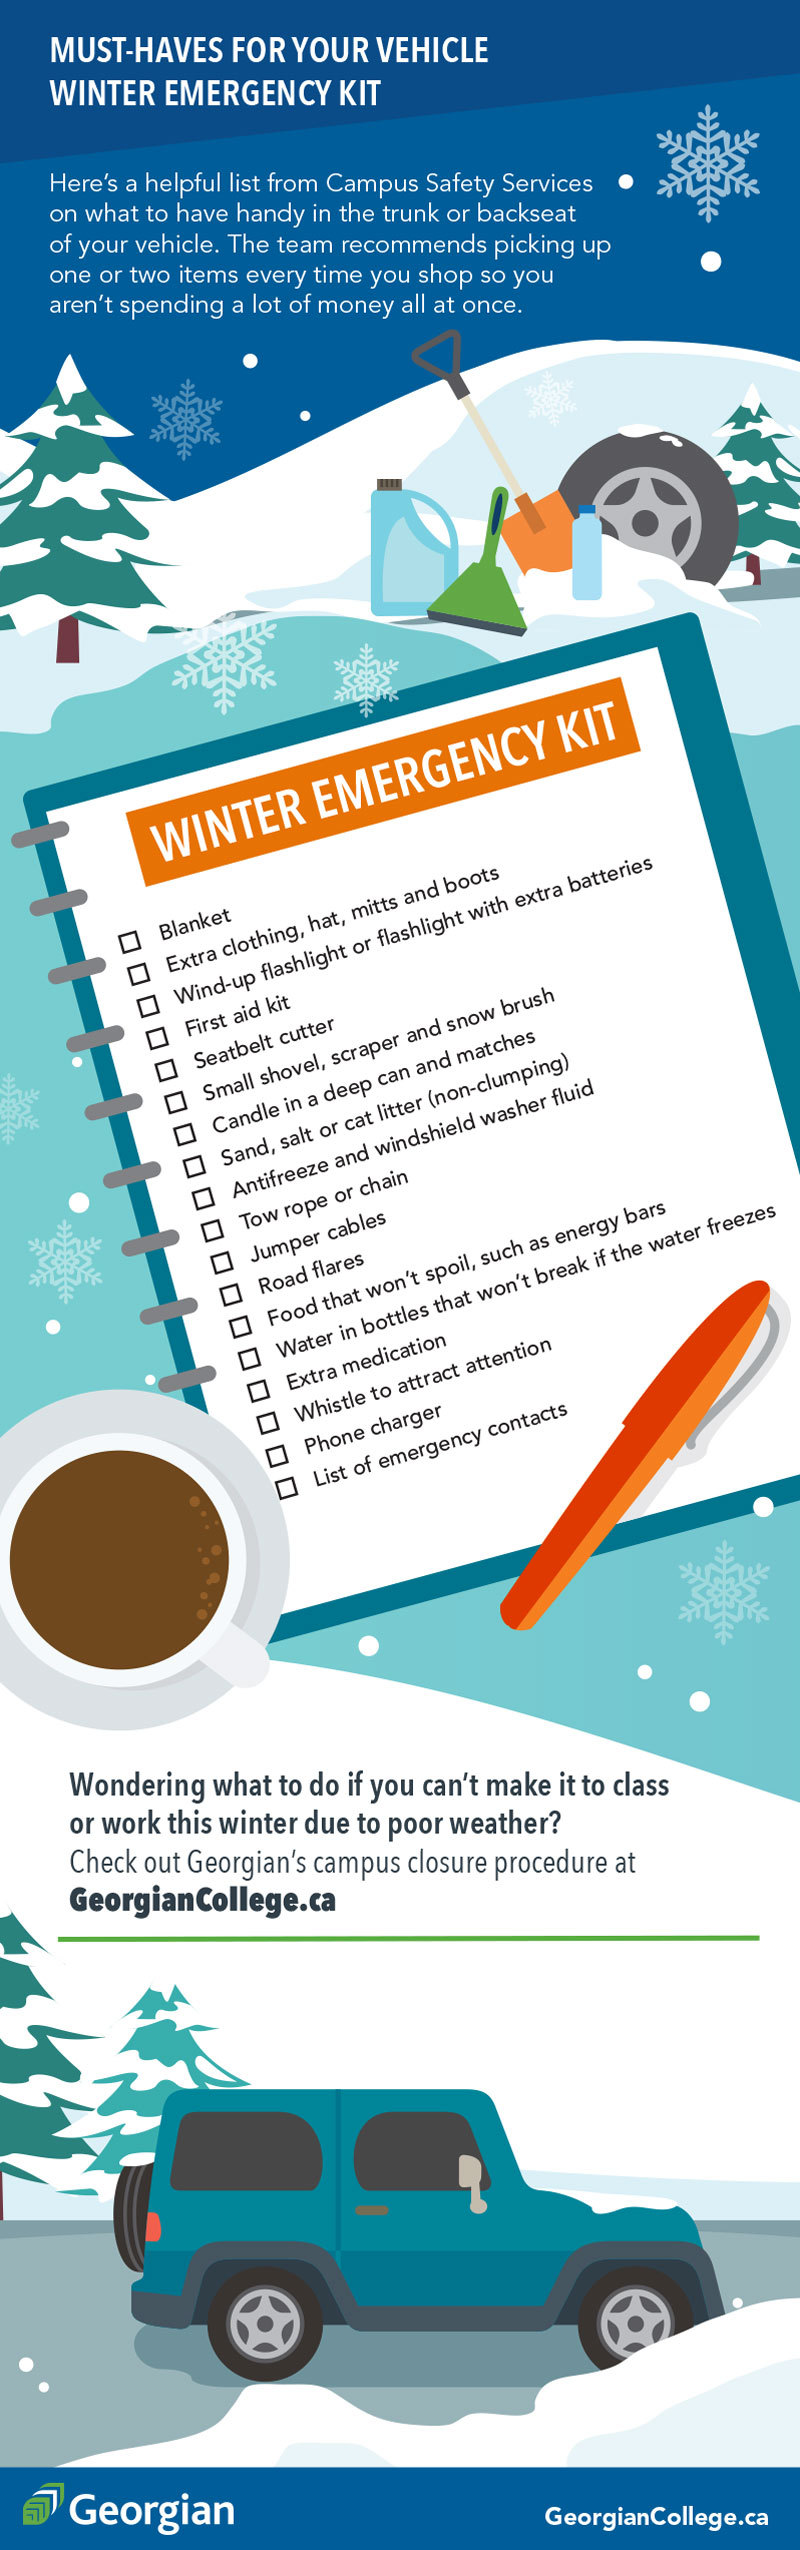 List of must-haves for safety kit in winter; see as .pdf